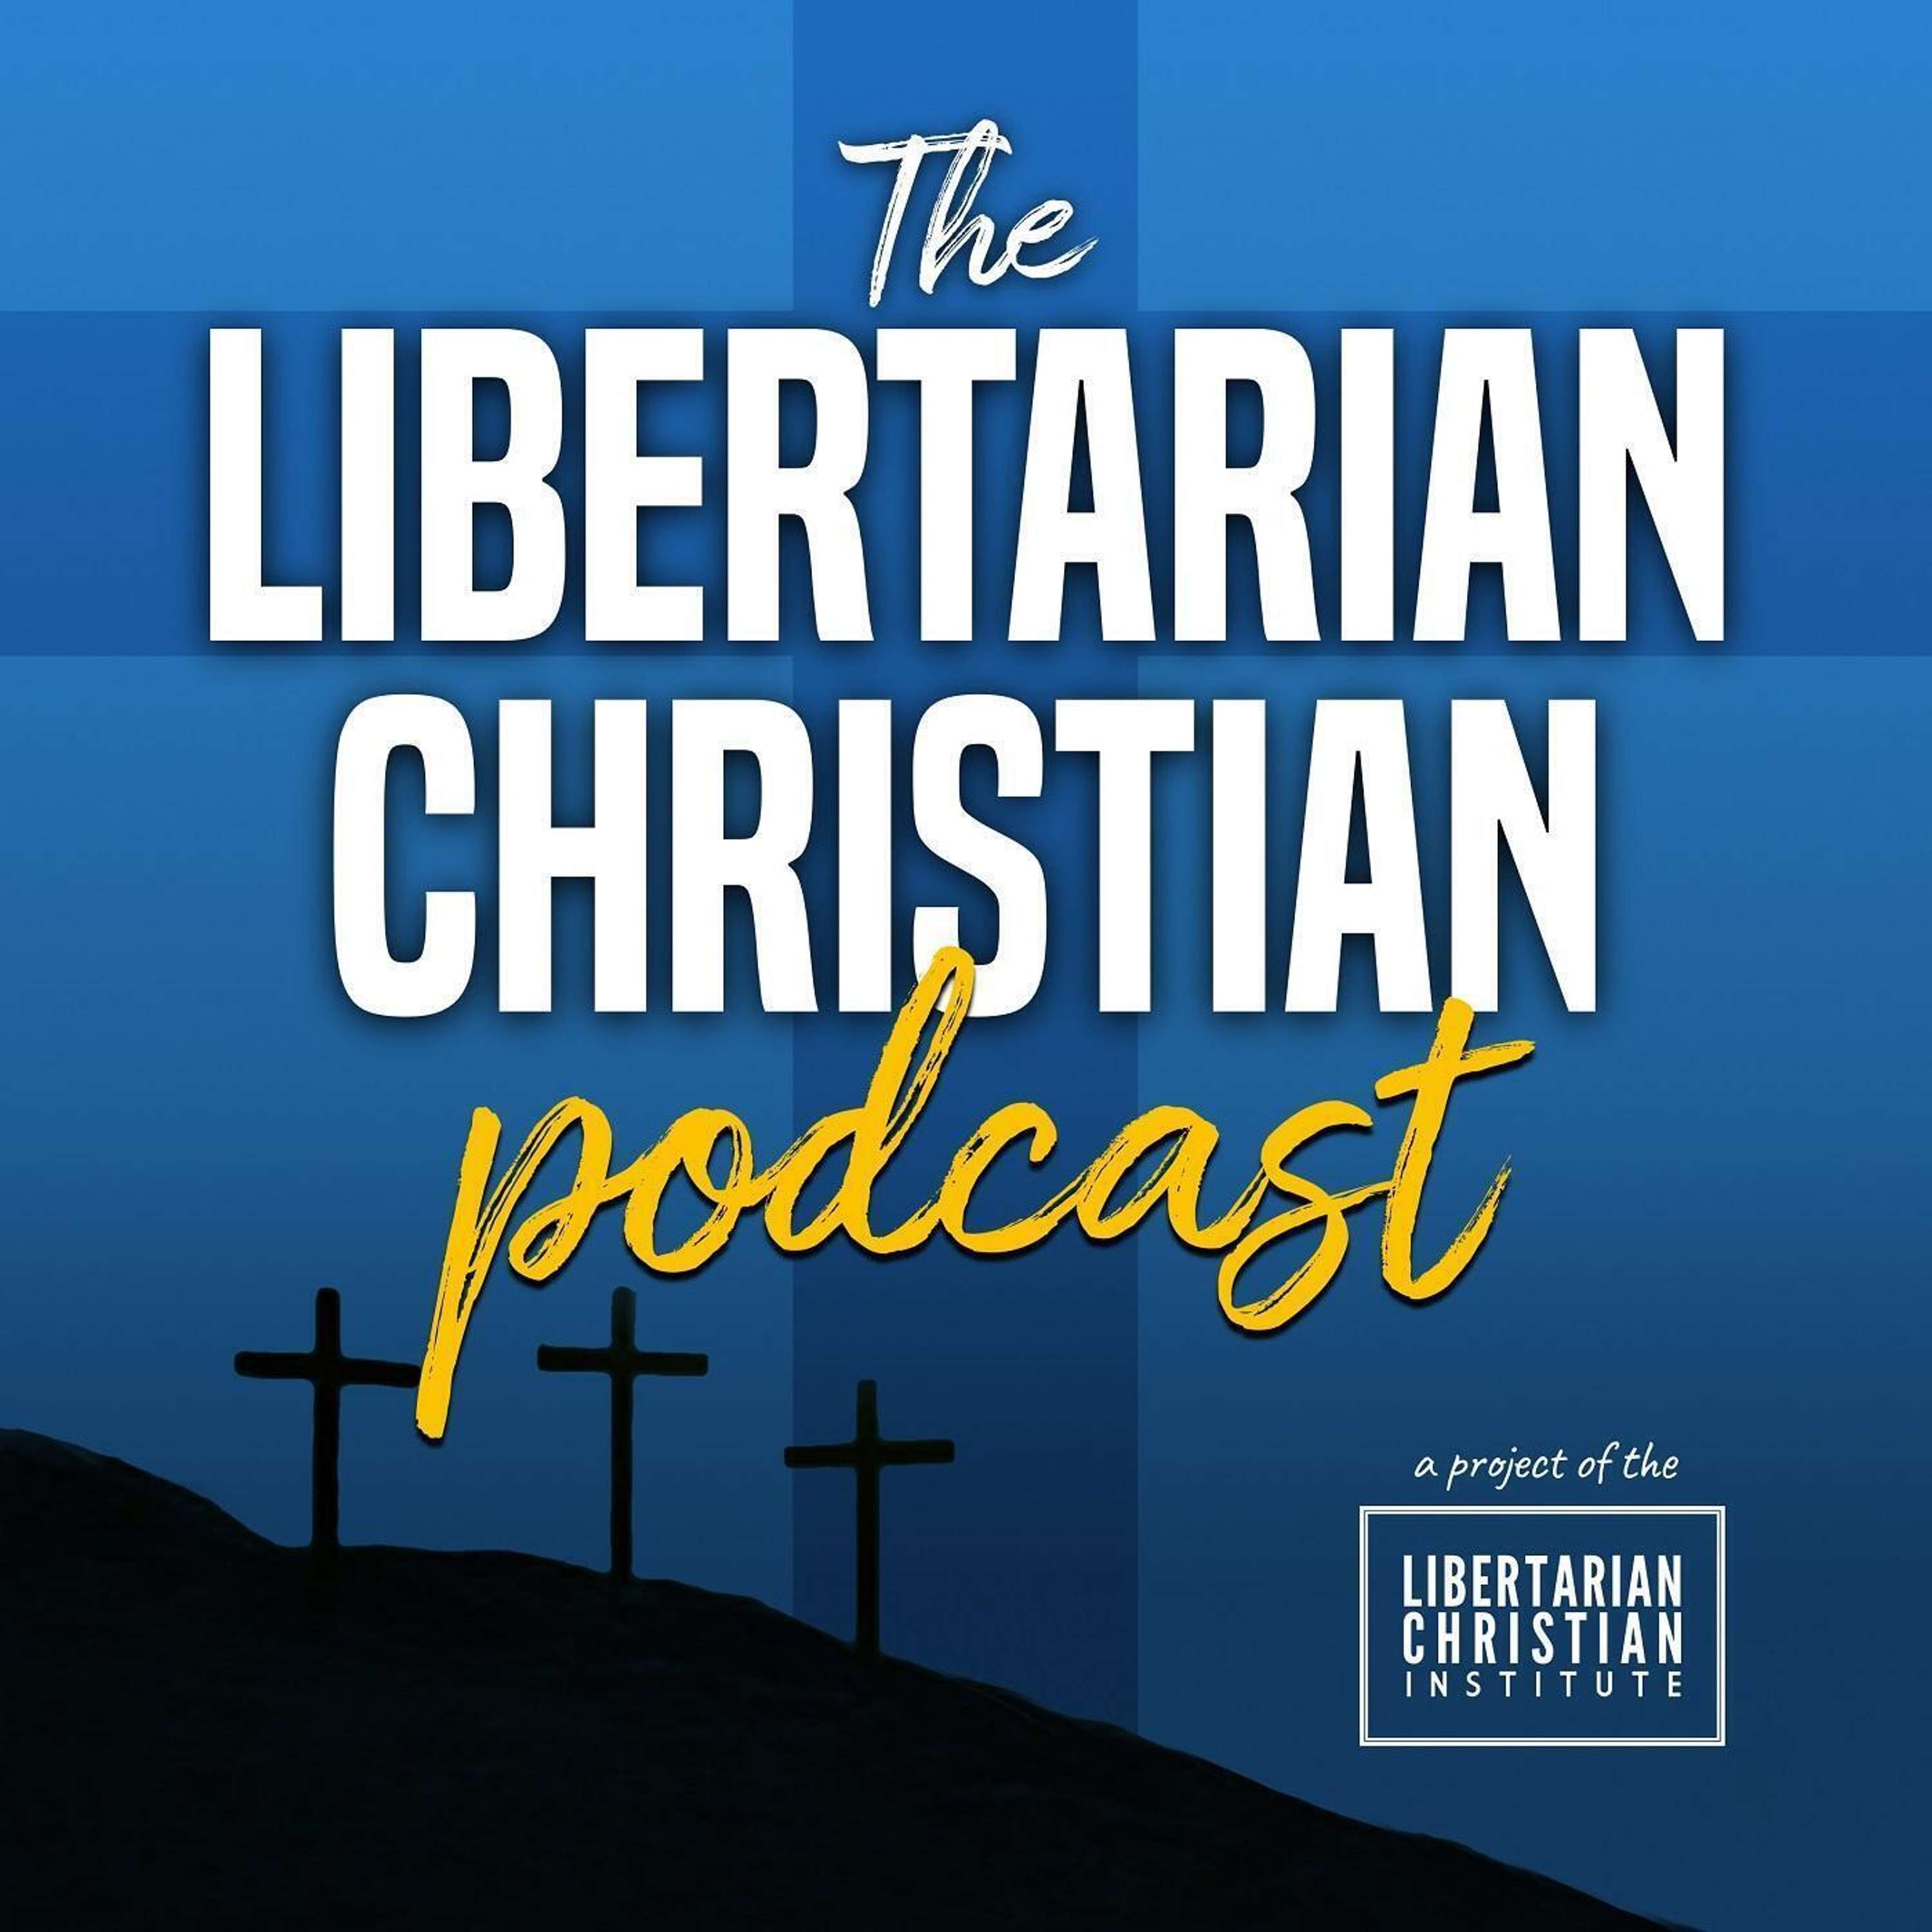 Ep 327: Christianity in the Libertarian Party, with Angela McArdle